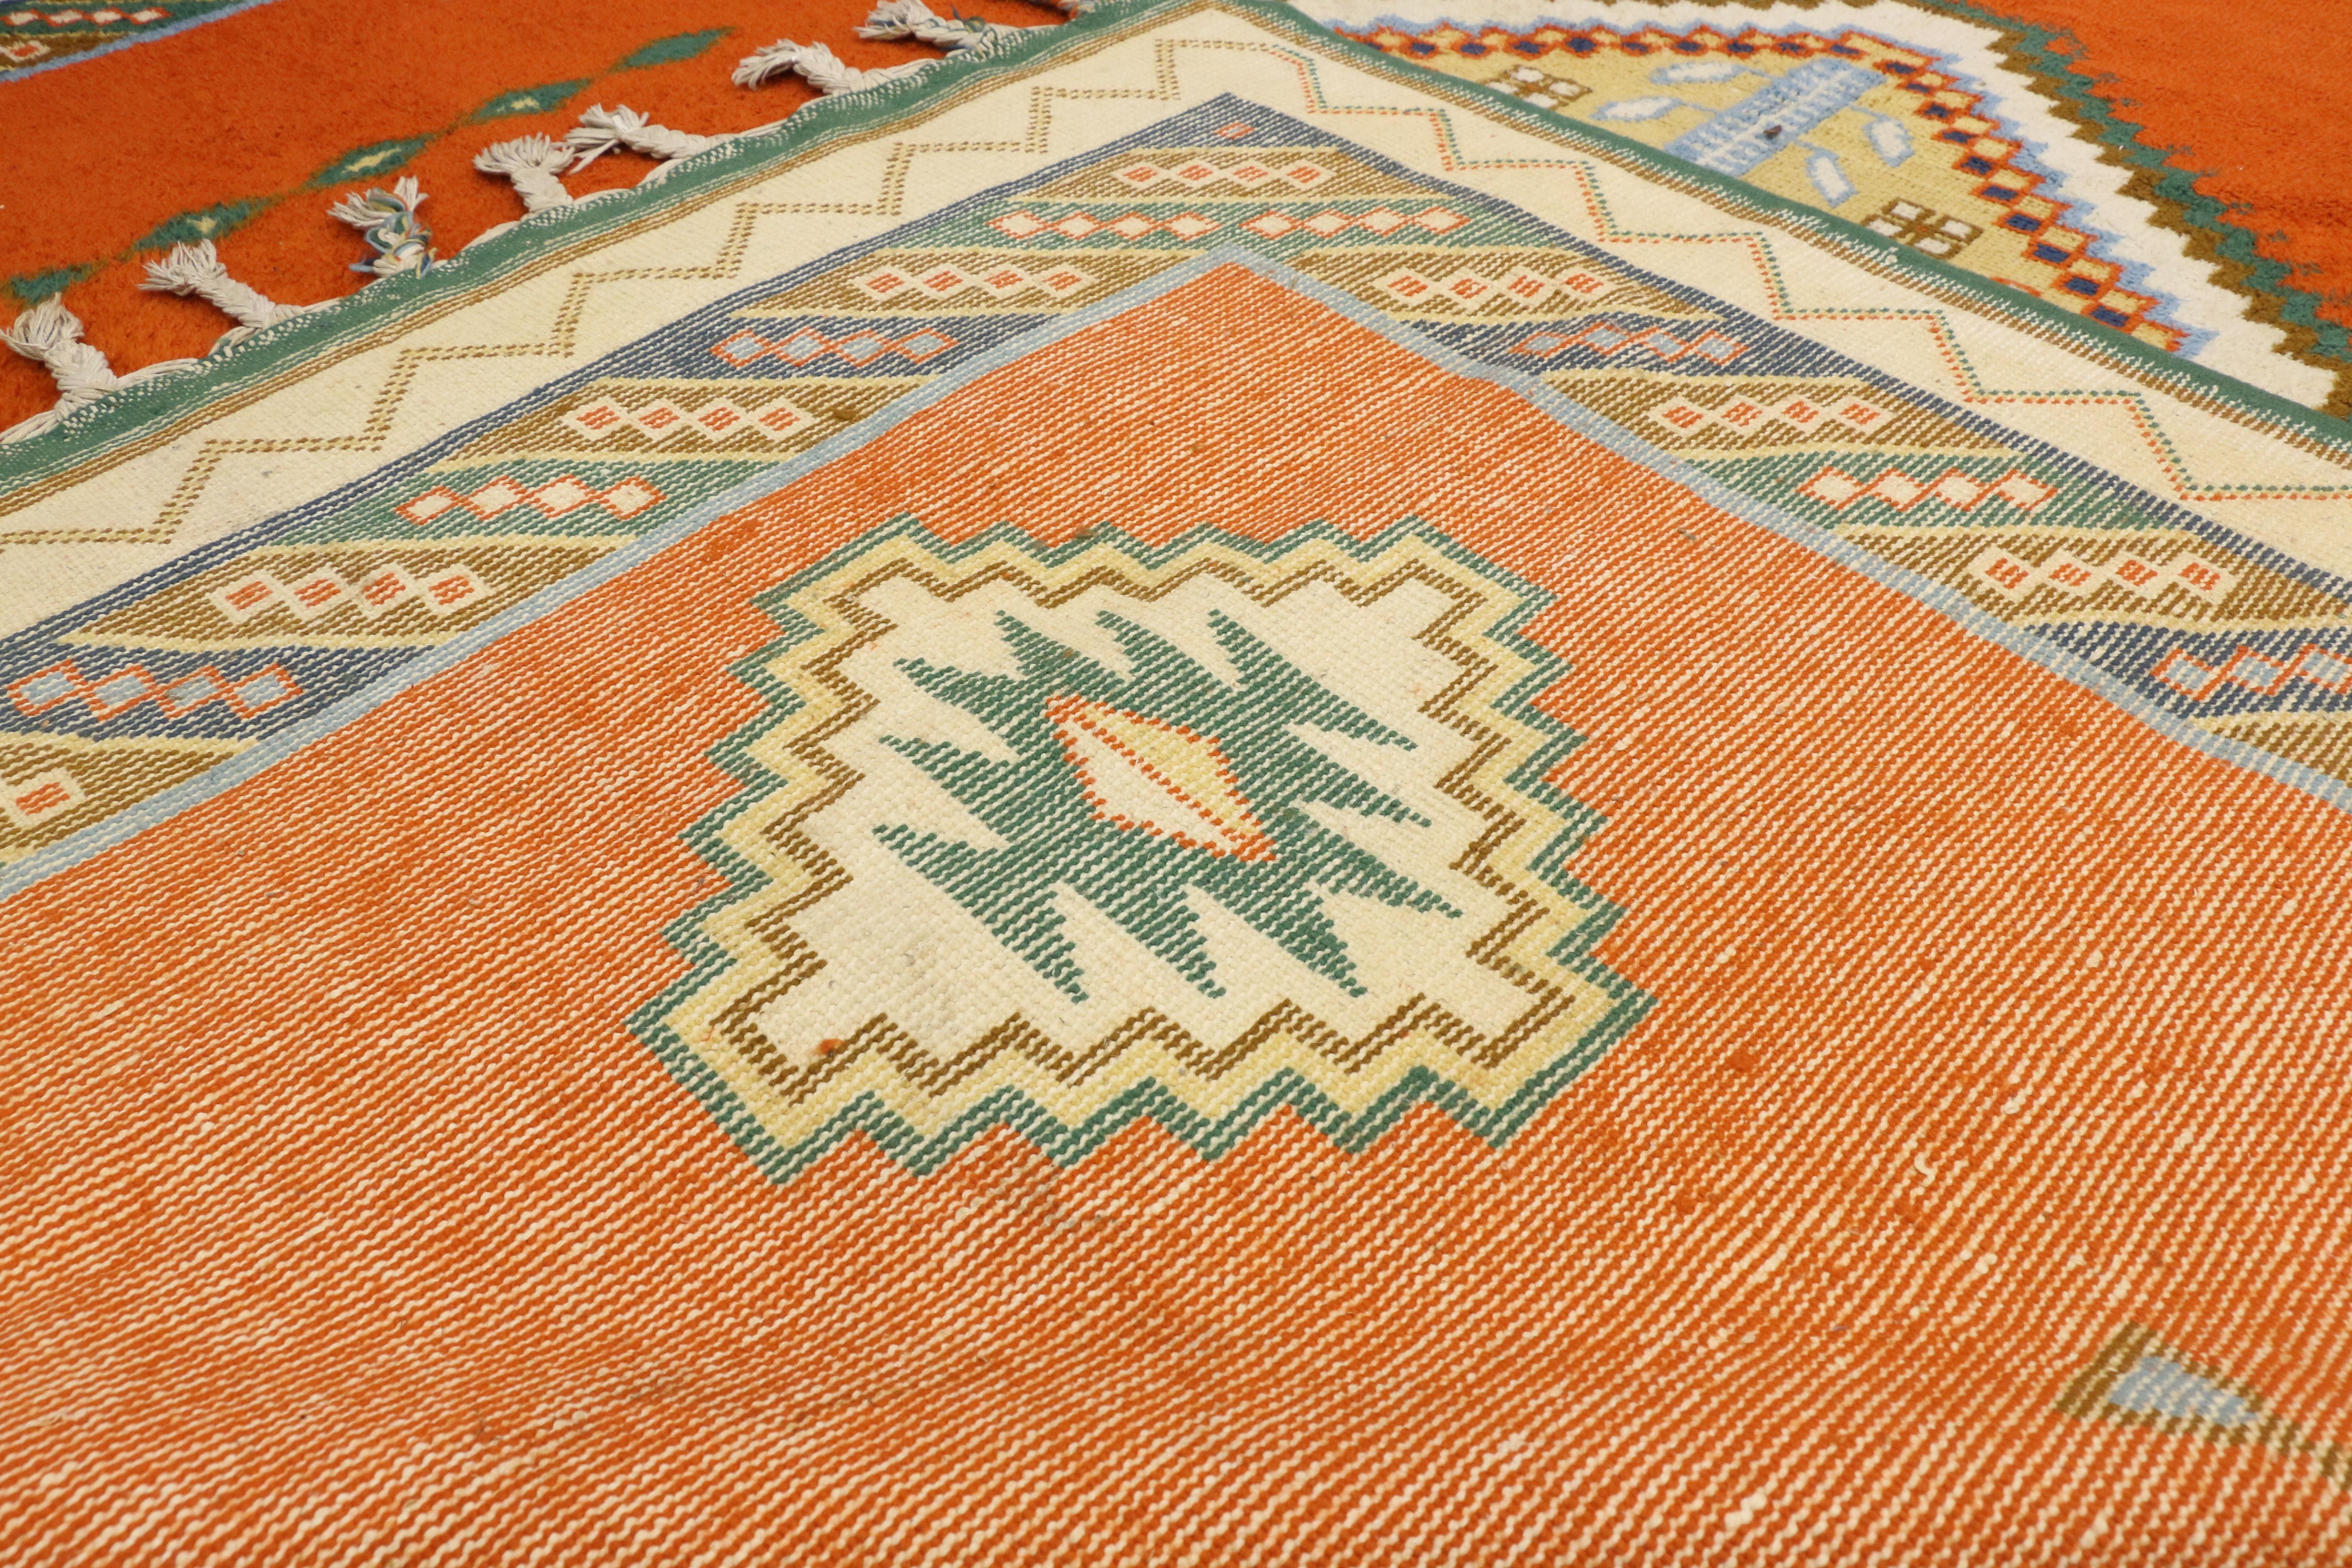 77202, Tribal style vintage Rabat Moroccan area rug, oversize rug, palace size carpet. This hand knotted wool vintage Rabat Moroccan rug features a four-and-one medallion design spread across a bright pumpkin field. The larger hooked diamond-shaped